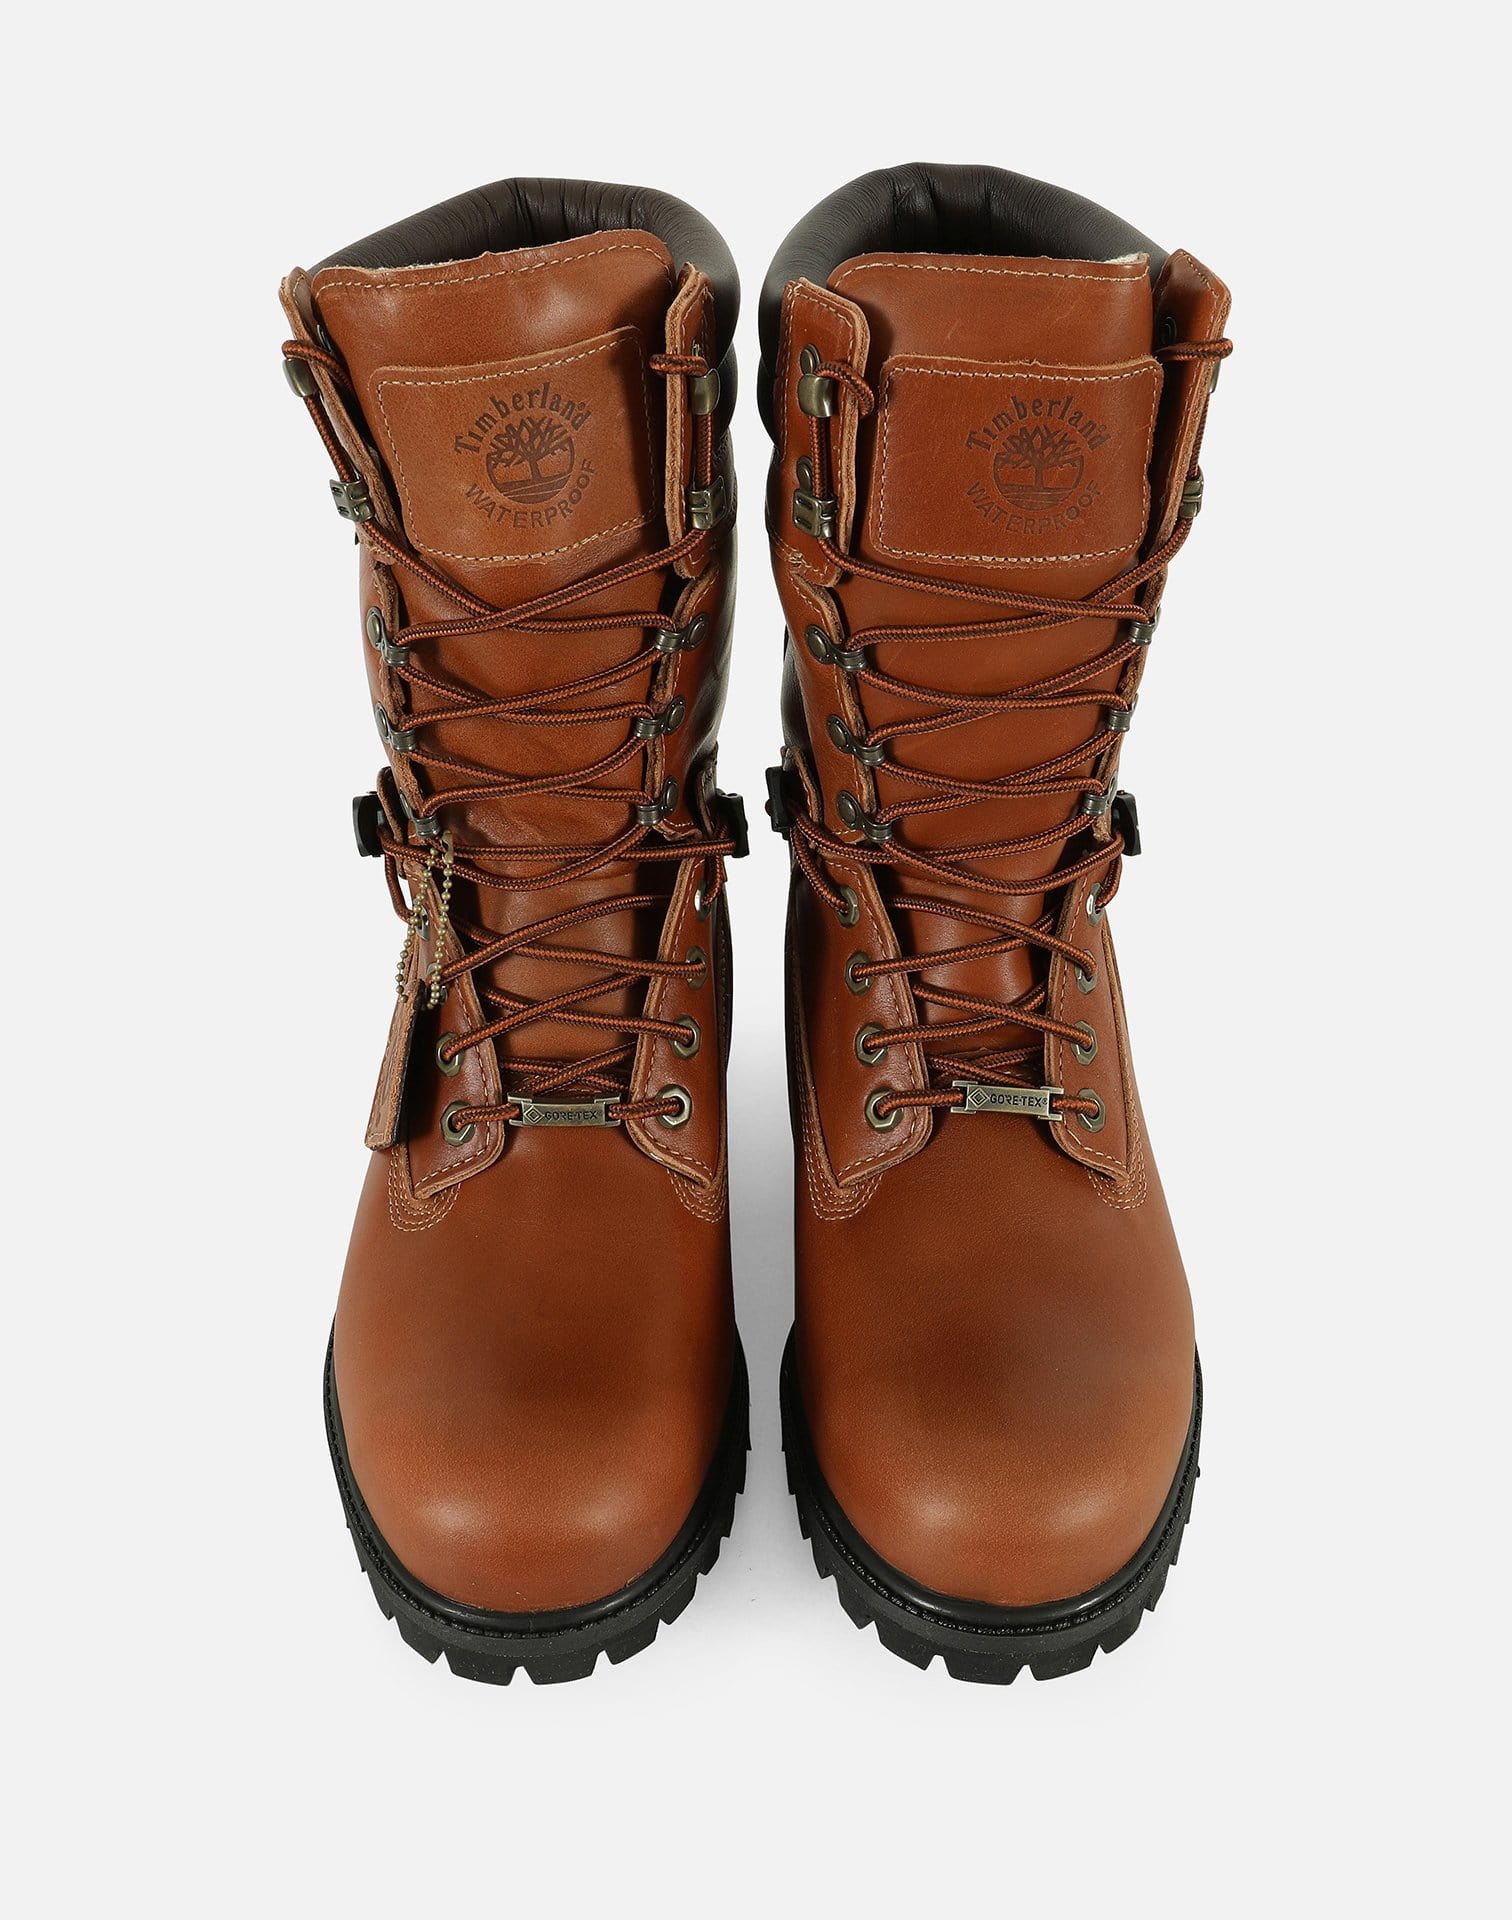 Timberland Men's Winter Extreme Super Boots